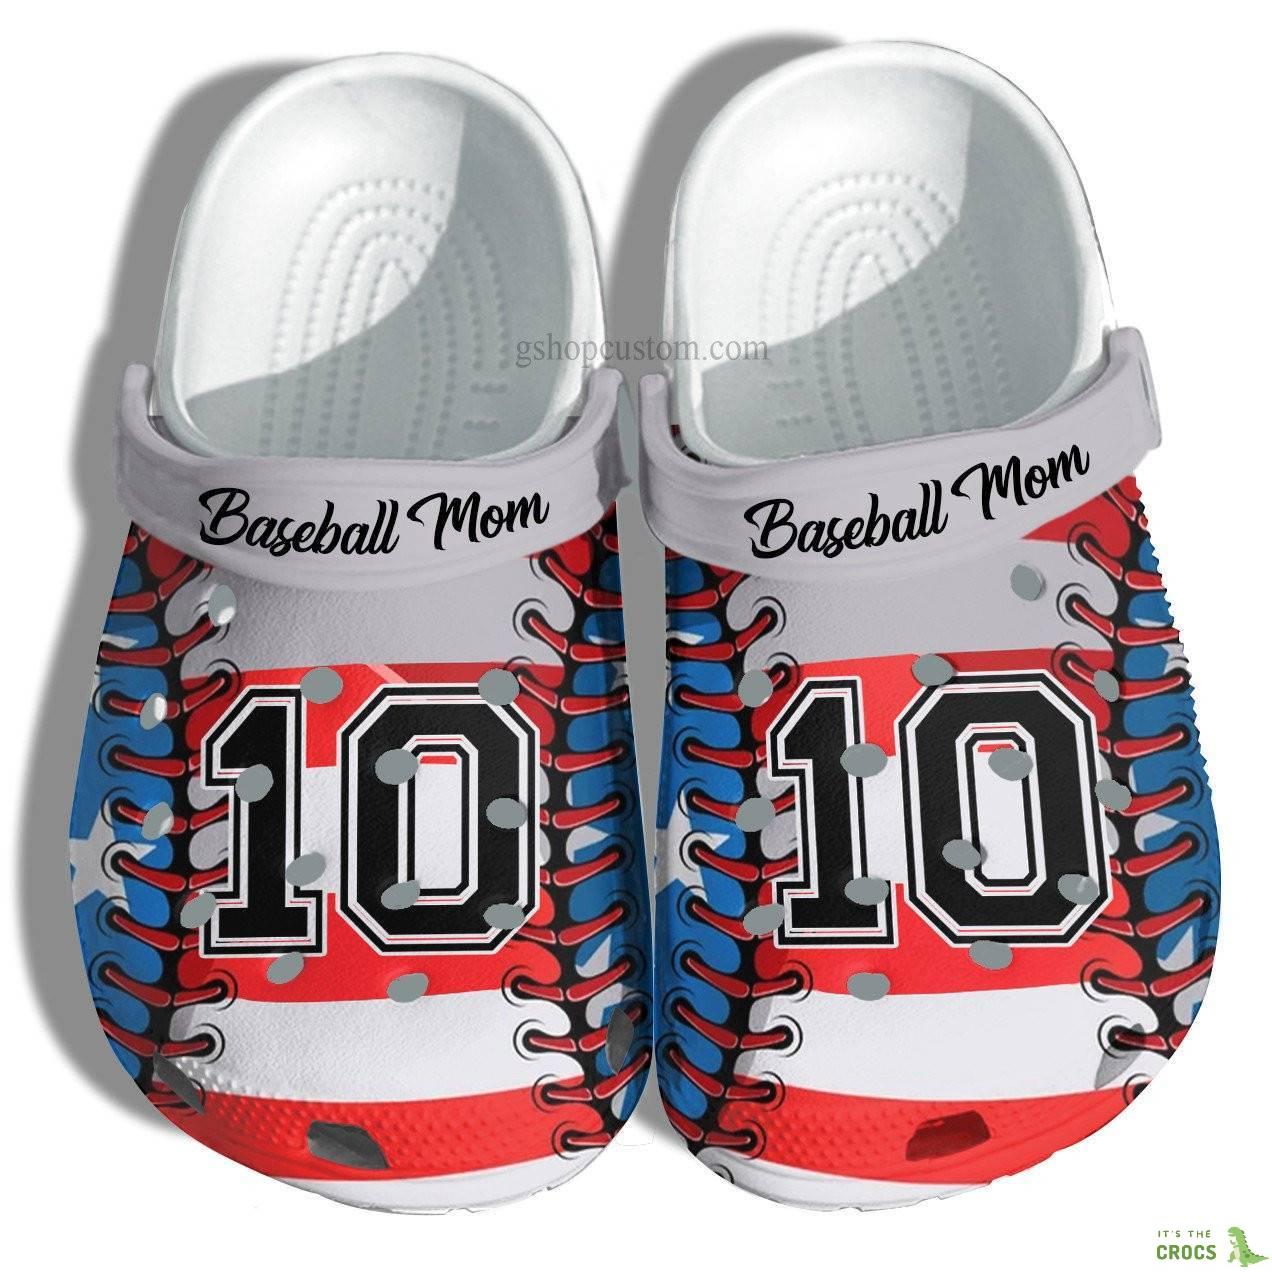 Baseball America Flag Croc Shoes Customize Name Number Player – Baseball 4Th Of July Crocs Shoes Gift Birthday Son